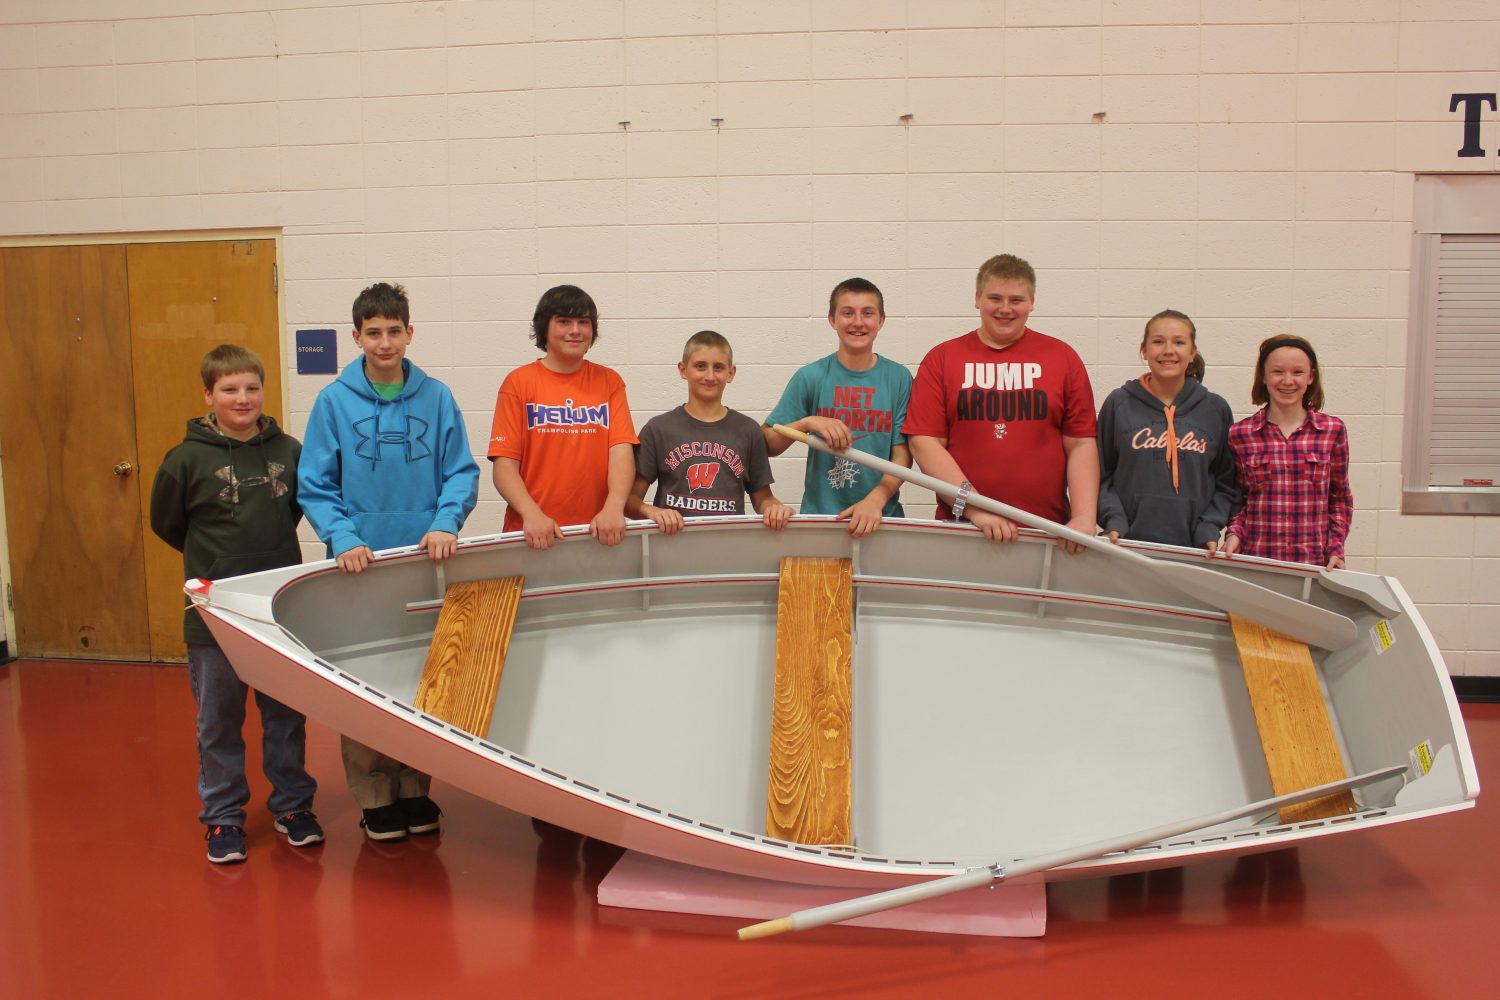 PRMS students get hands-on with boat building